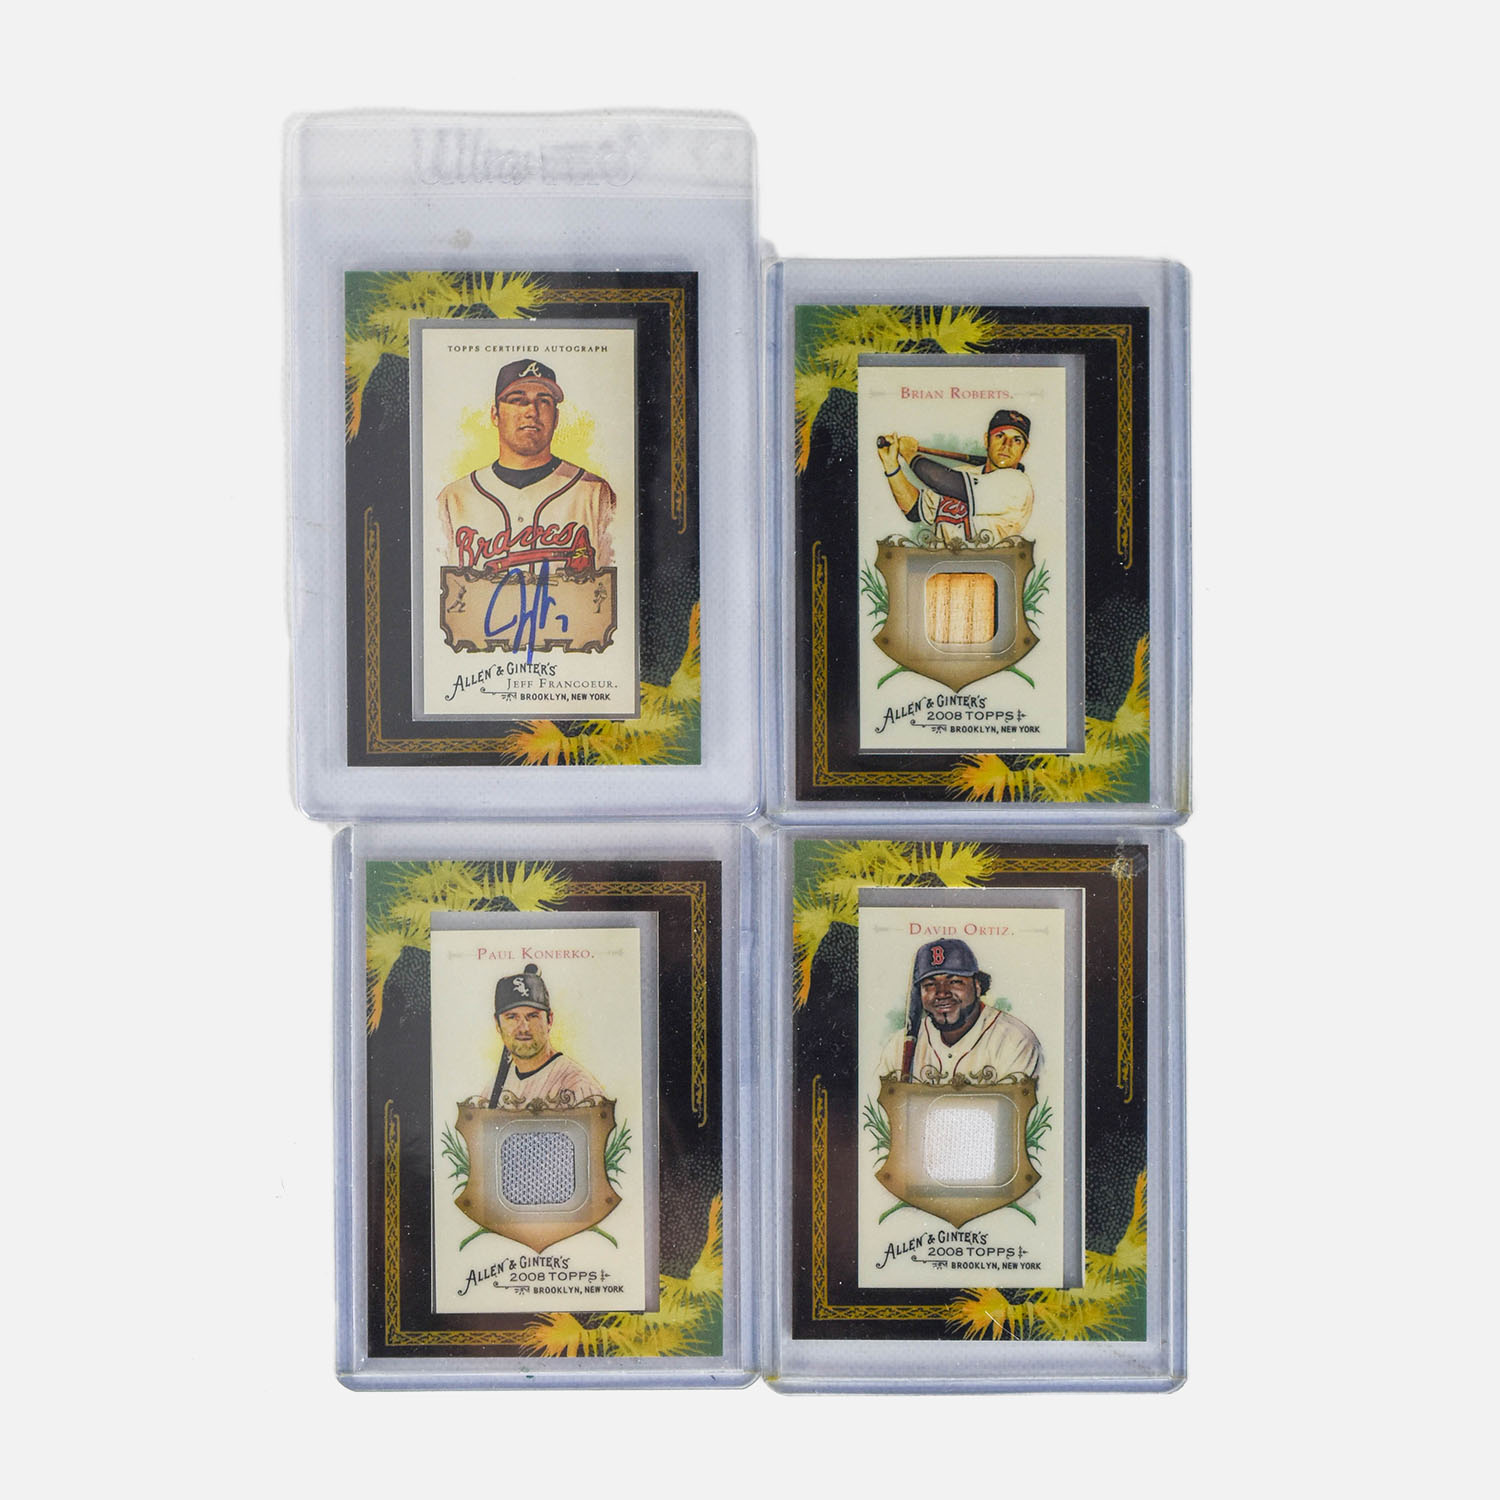 Four 2008 MLB All Star Allen and Ginters Special Edition Baseball Cards with Extra 750 Plus Mint Cards